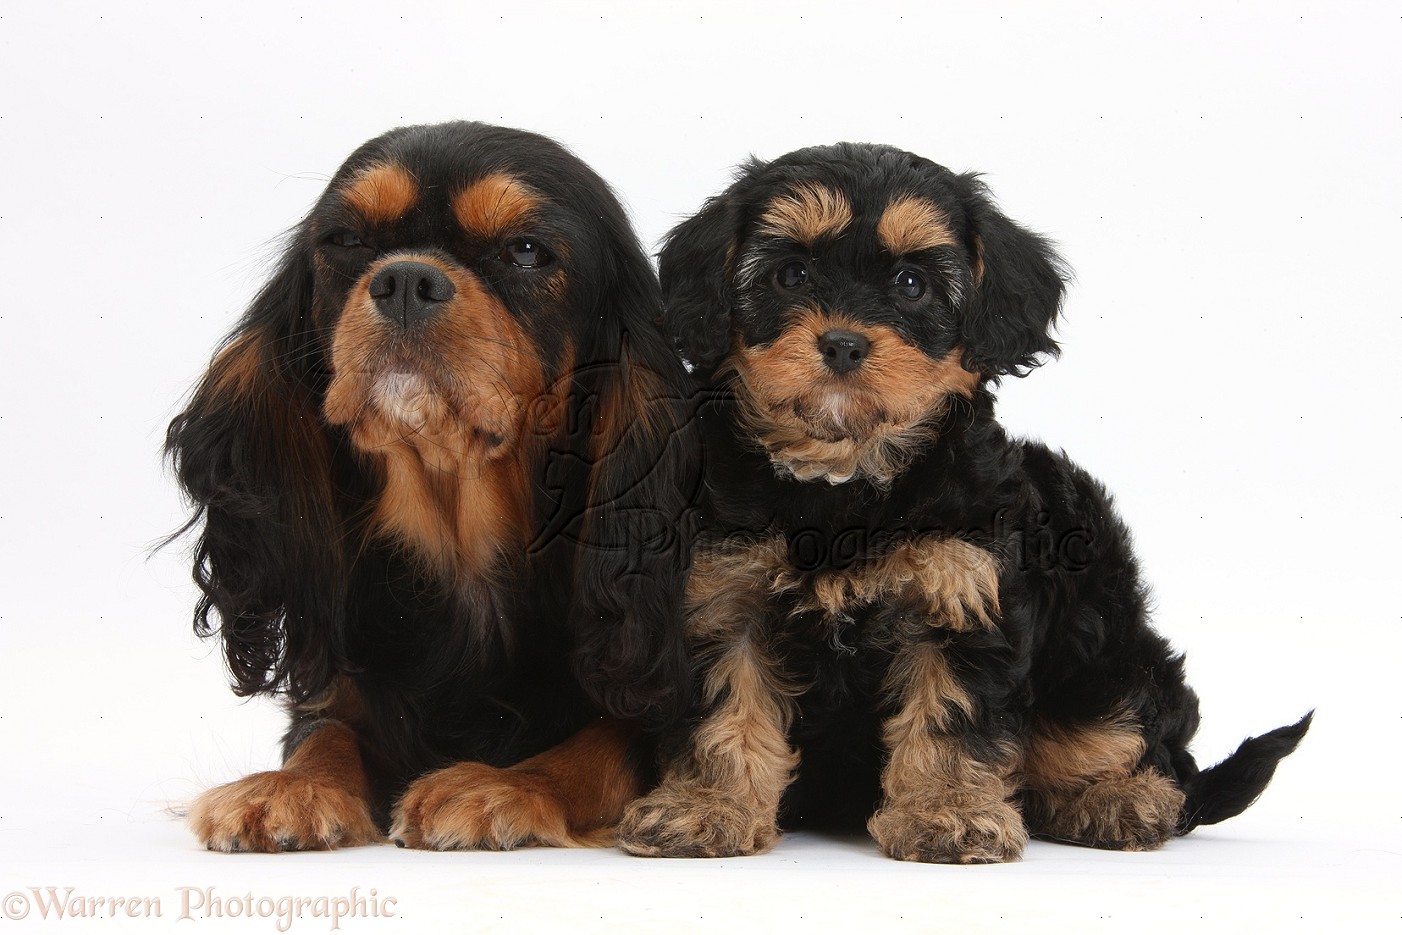 Dogs: Black-and-tan King Charles and Cavapoo pup photo WP32377